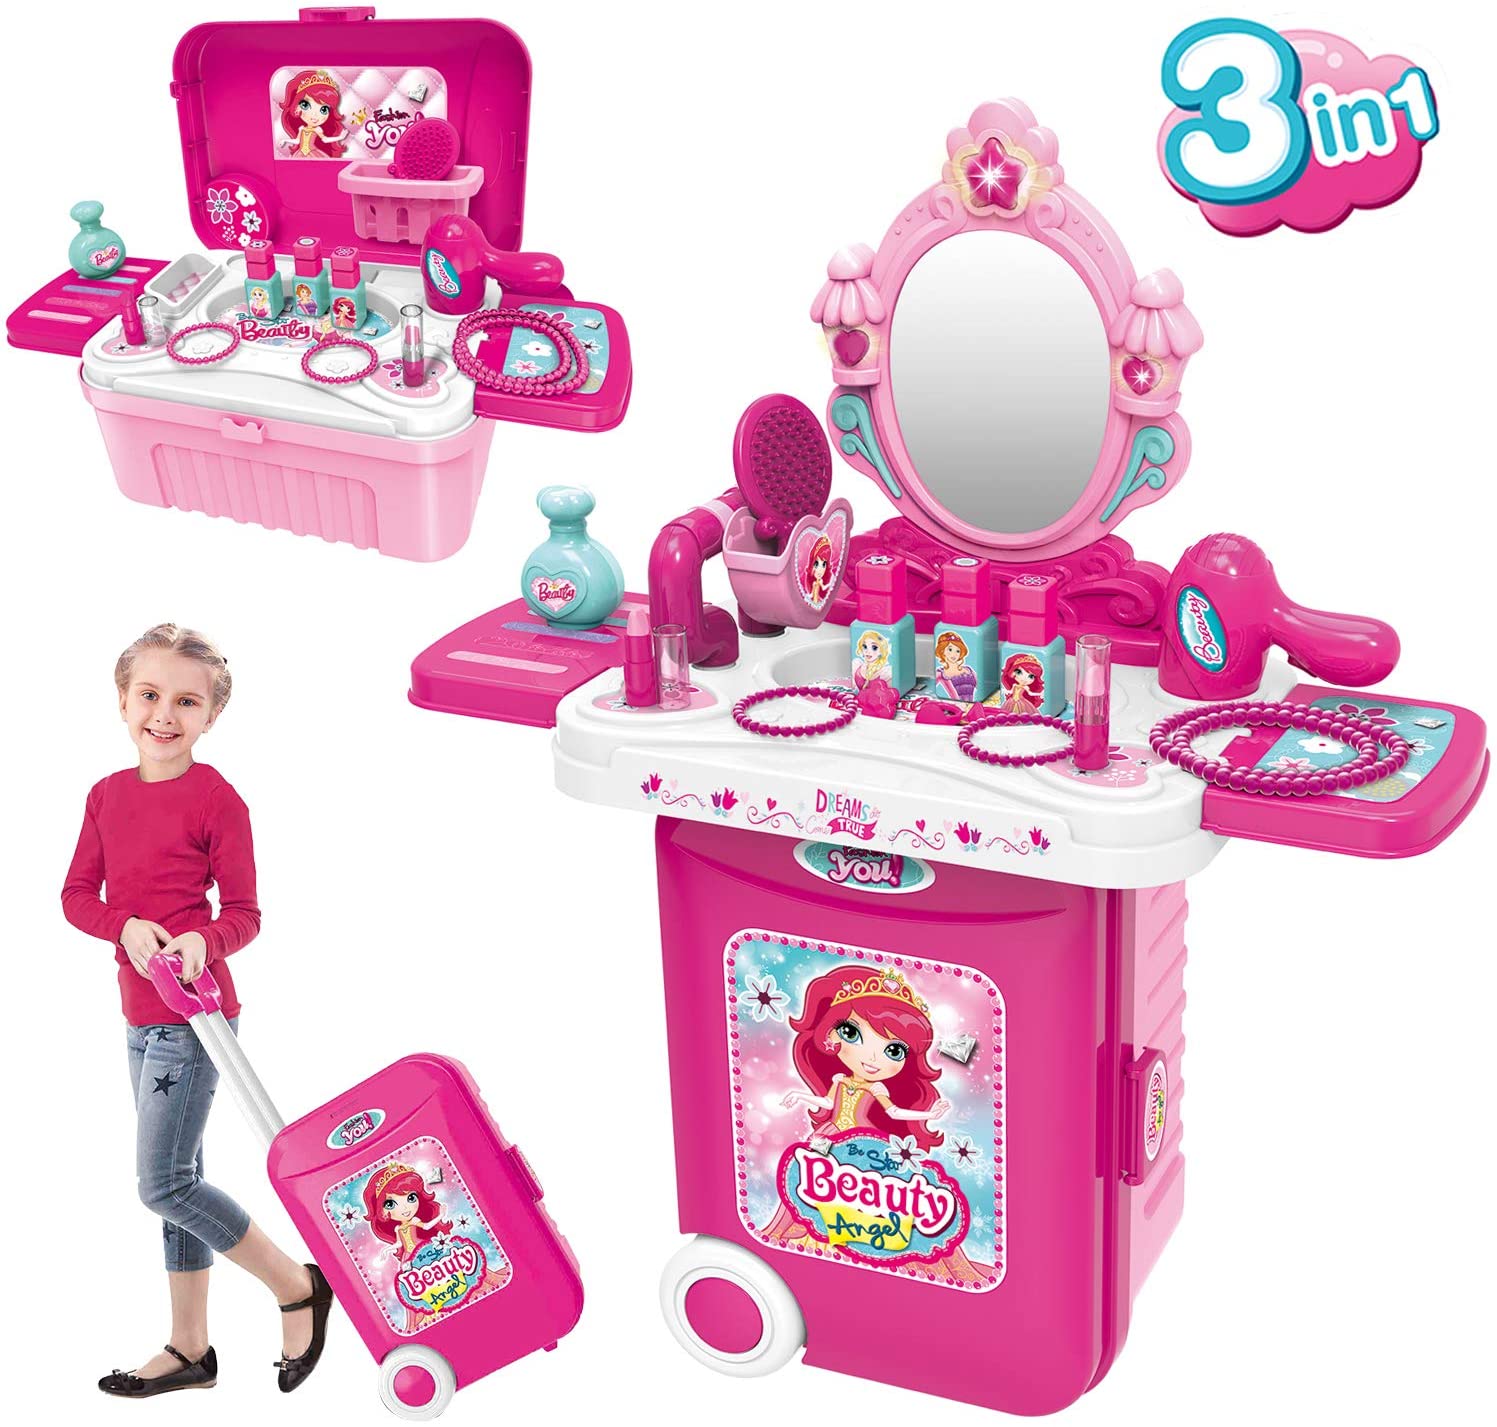 3 In 1 Role Play Vanity Dressing Play Set Girls Makeup Toy For Kids Lazada Ph